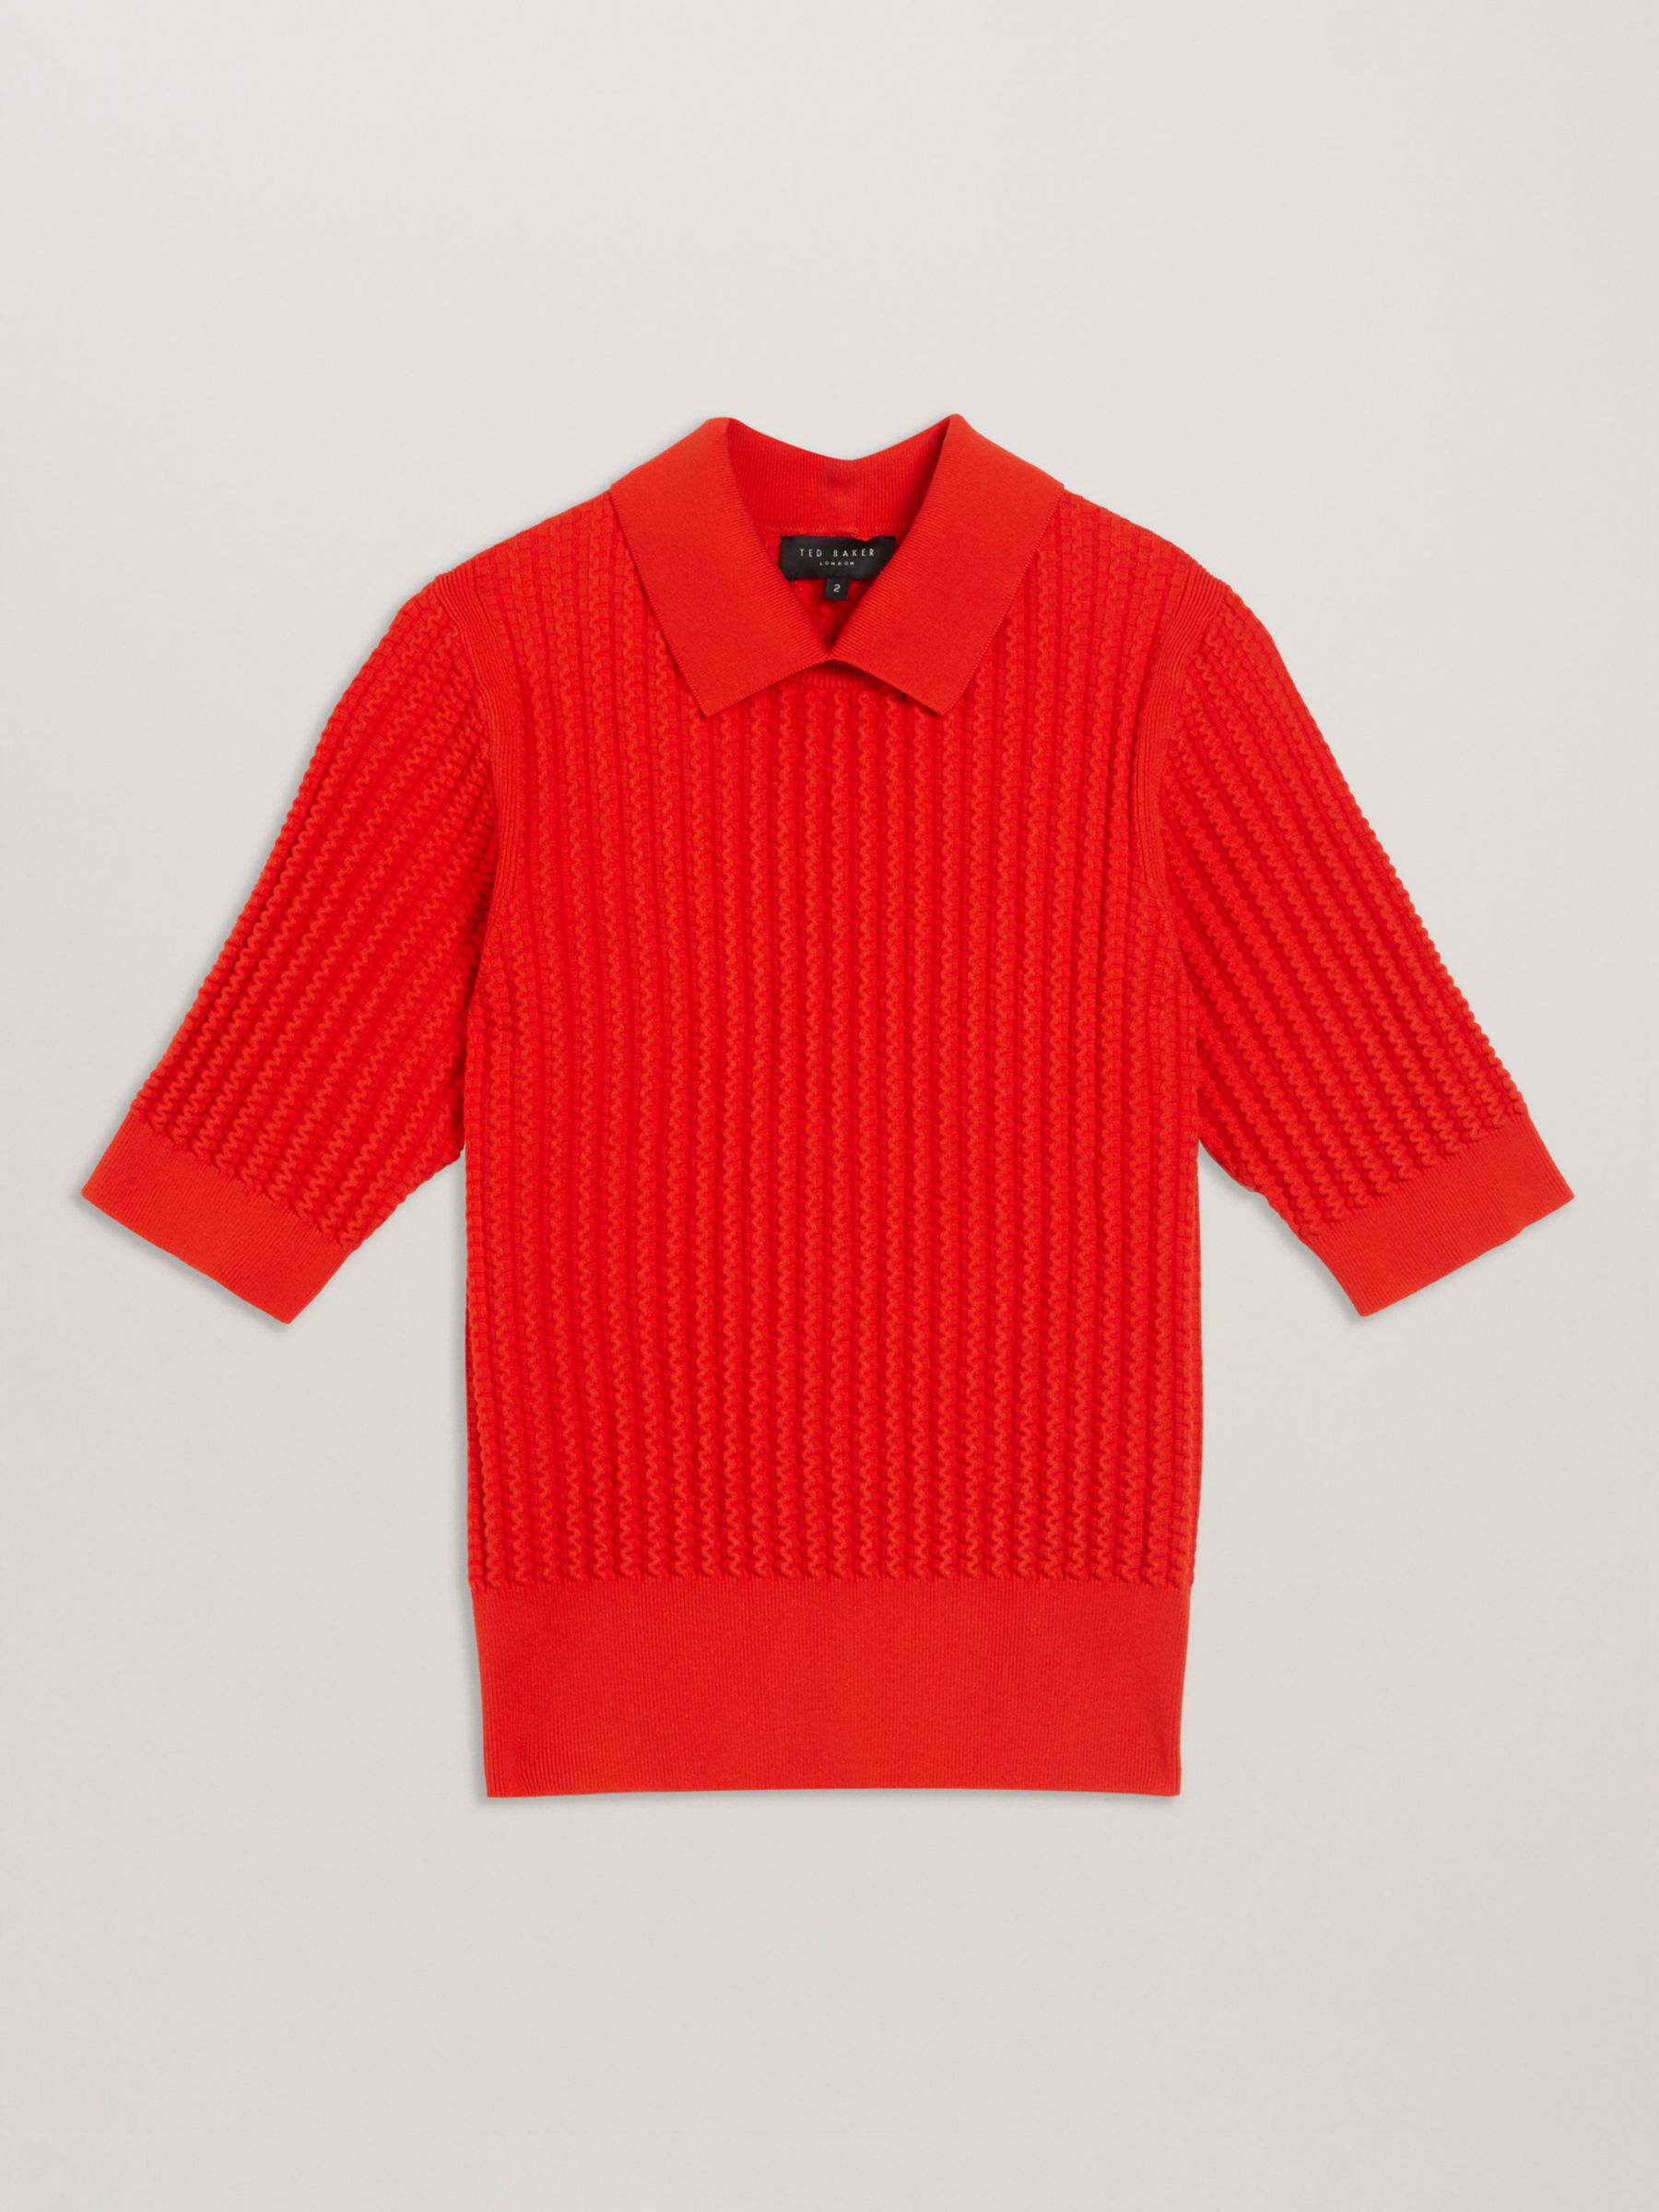 Buy Ted Baker Morliee Textured Knit Top, Red Online at johnlewis.com